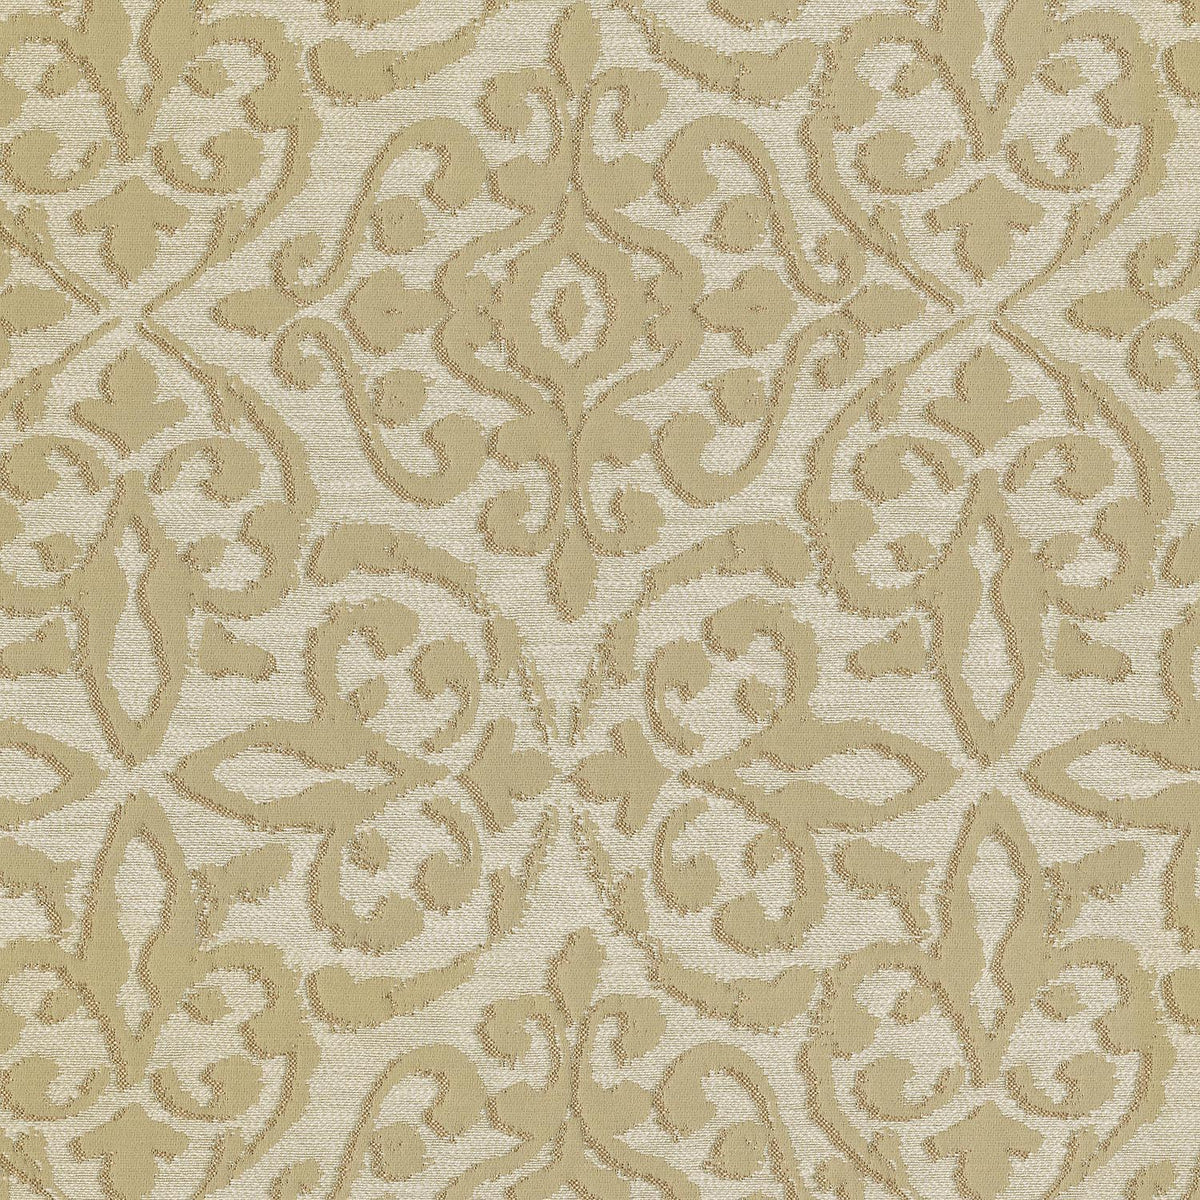 P/K Lifestyles Coralie - Champagne 410011 Fabric Swatch